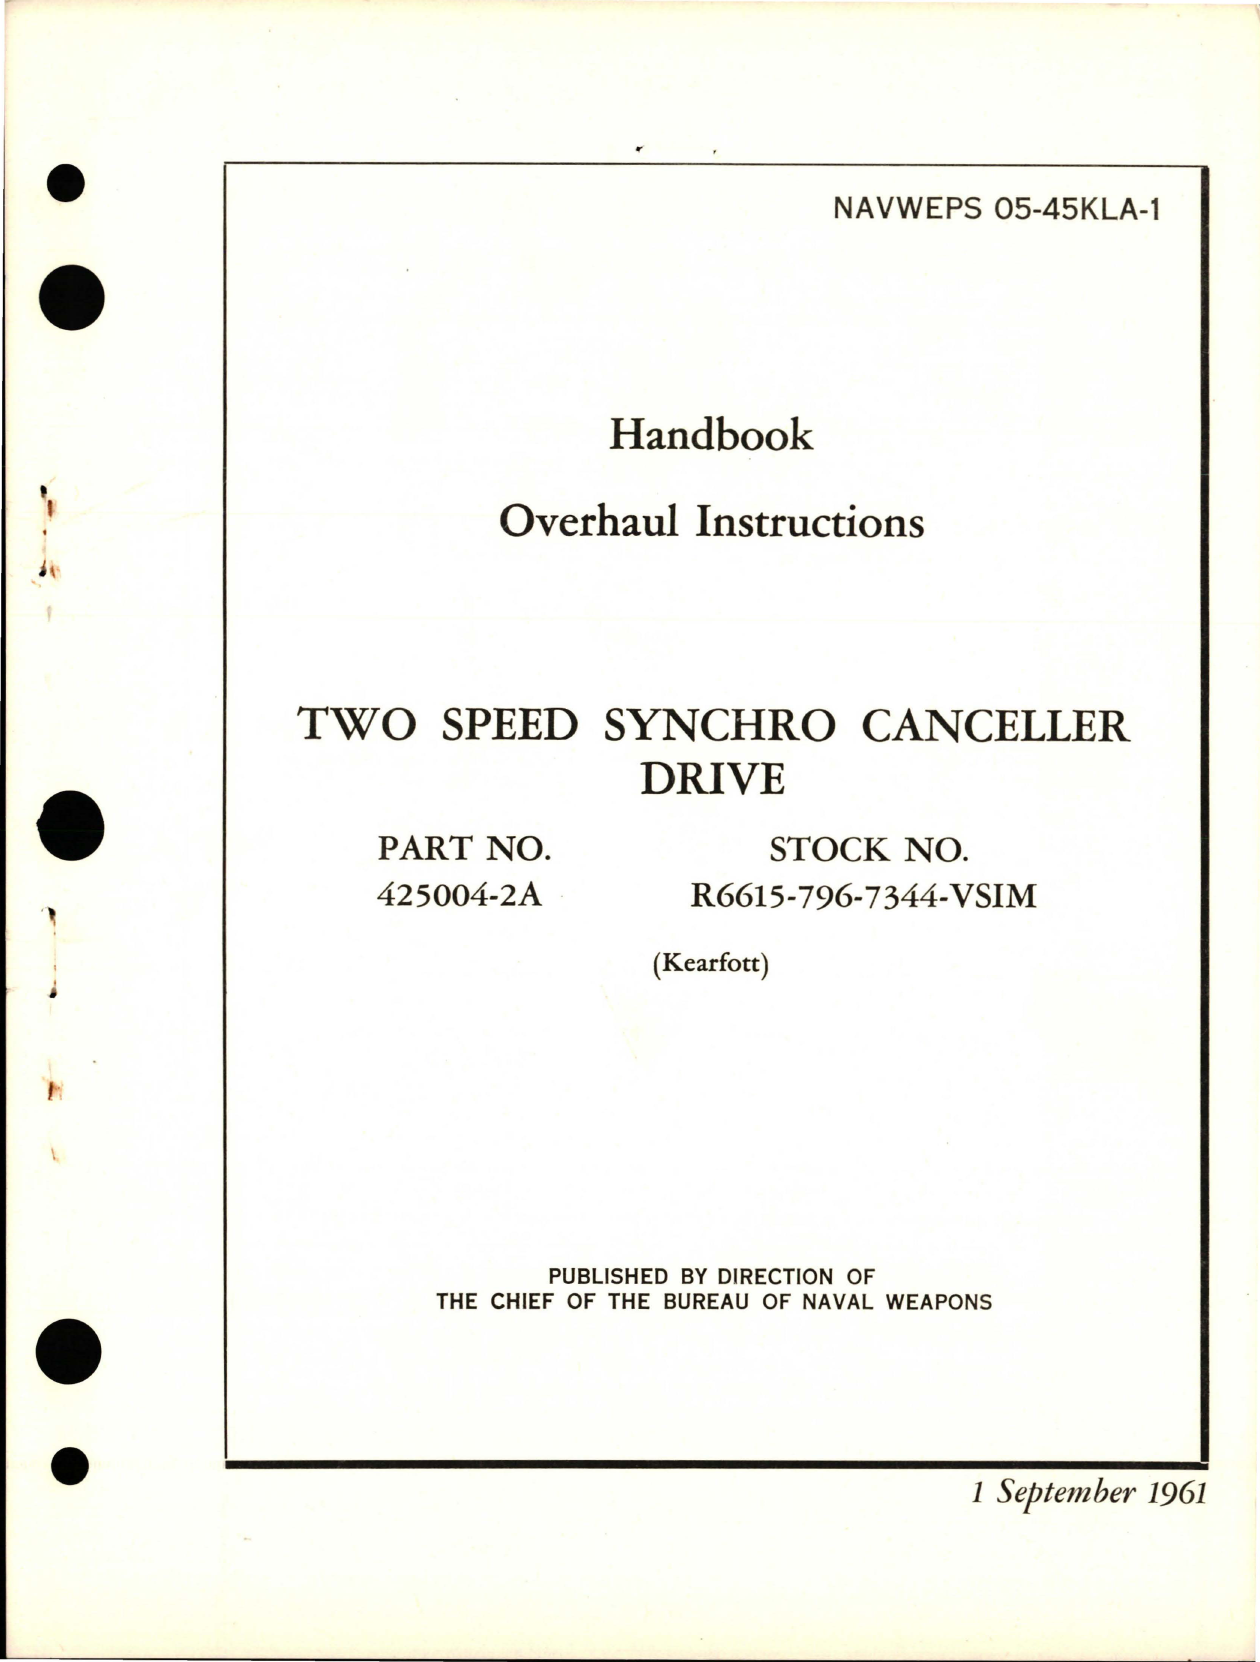 Sample page 1 from AirCorps Library document: Overhaul Instructions for Two Speed Synchro Canceller Drive - Part 425004-2A